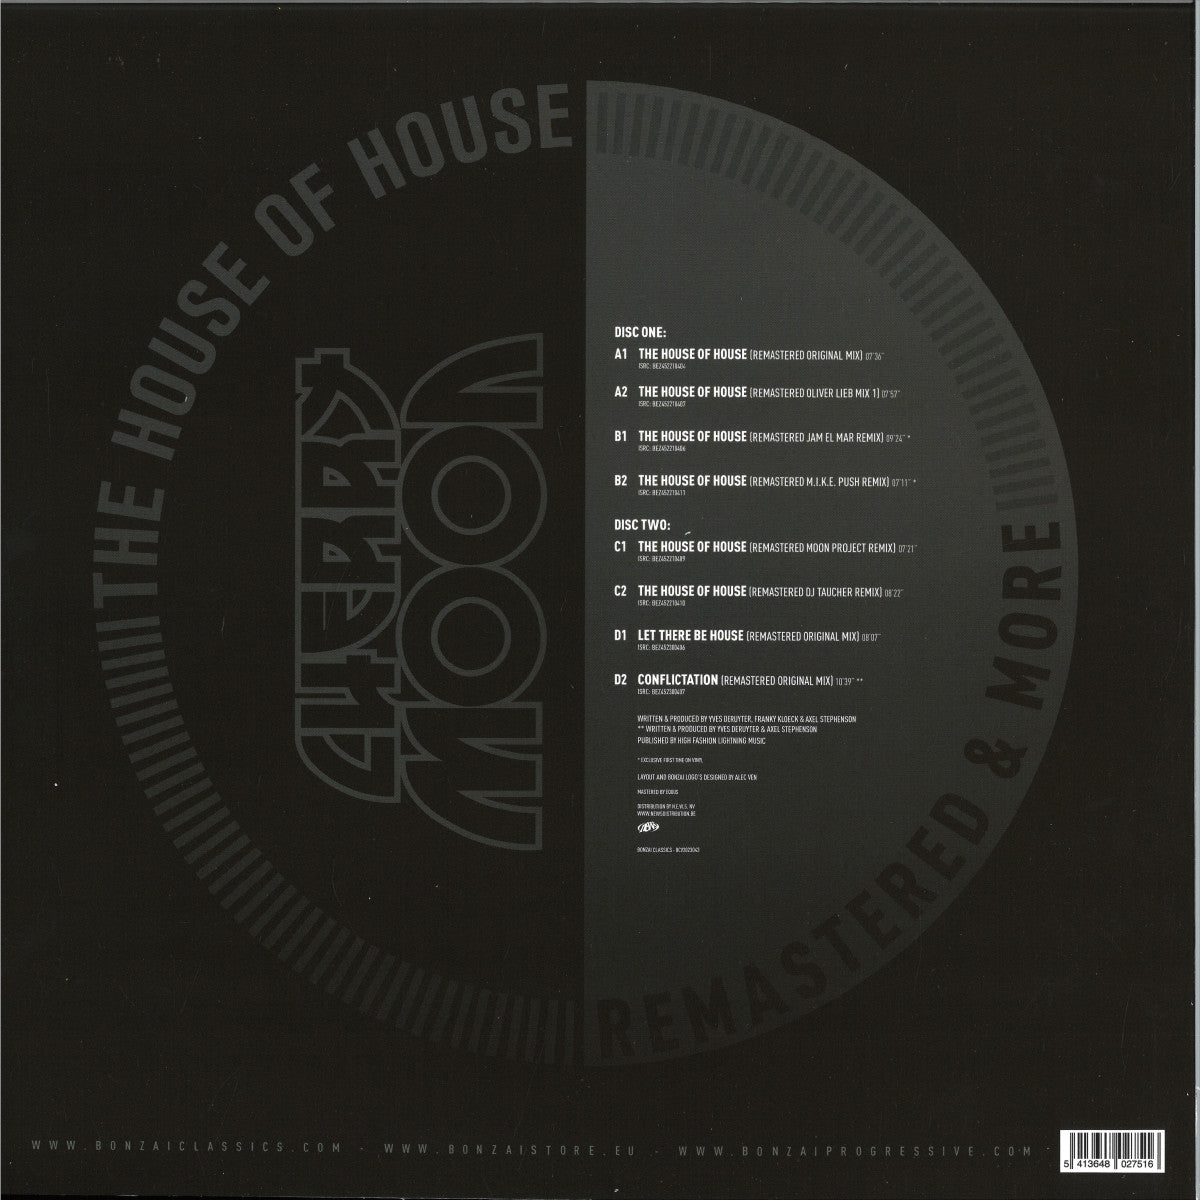 Cherrymoon Trax - The House of House (Remastered & More) [Bonzai]